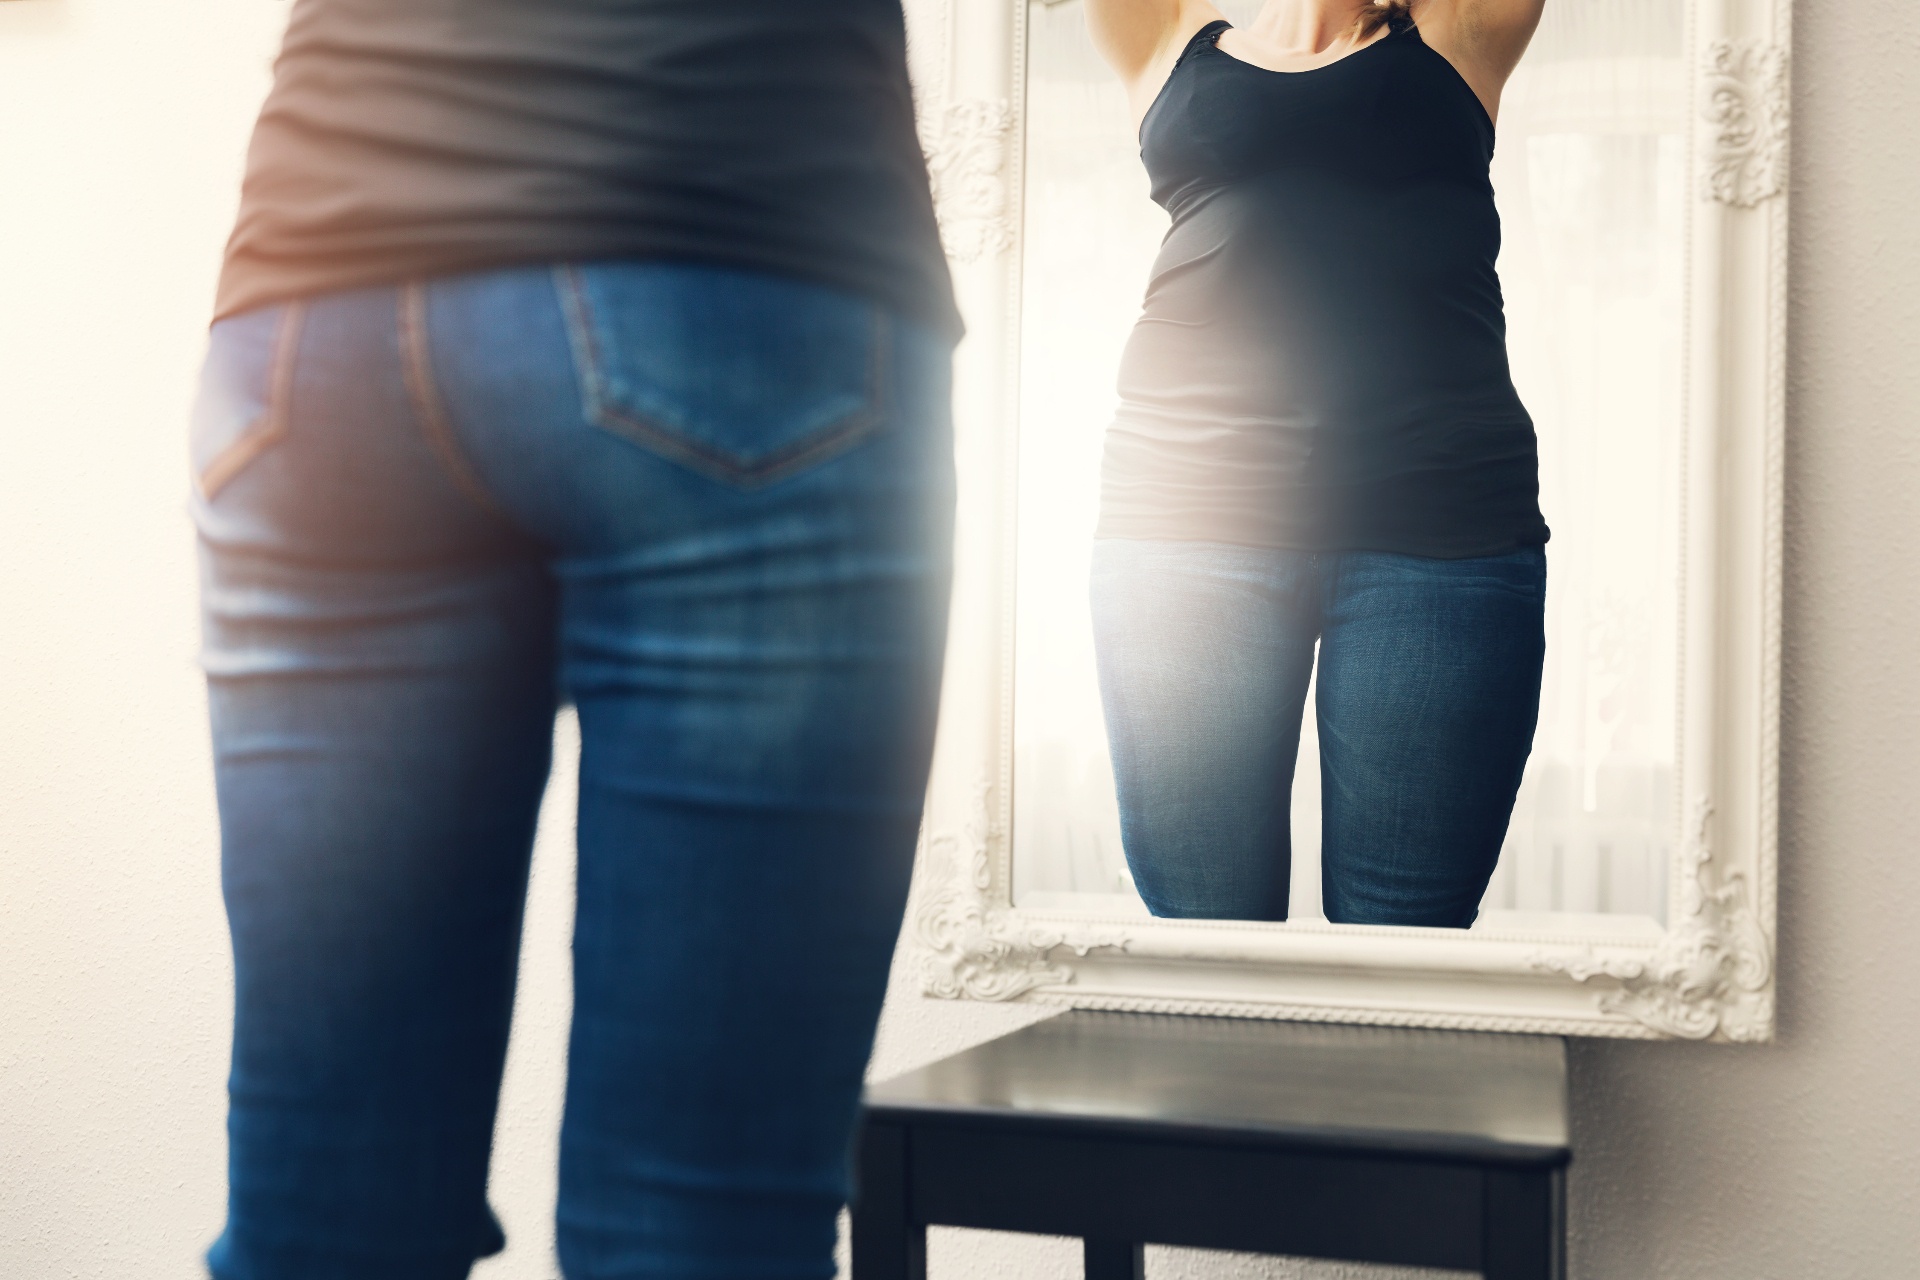 A close up of a person looking at themselves in the mirror. This could represent the focus on self body image counseling in Palm Beach County, FL can address. Learn more about counseling for body image issues in Palm Beach County, FL by contacting a therapist for body image issues today.